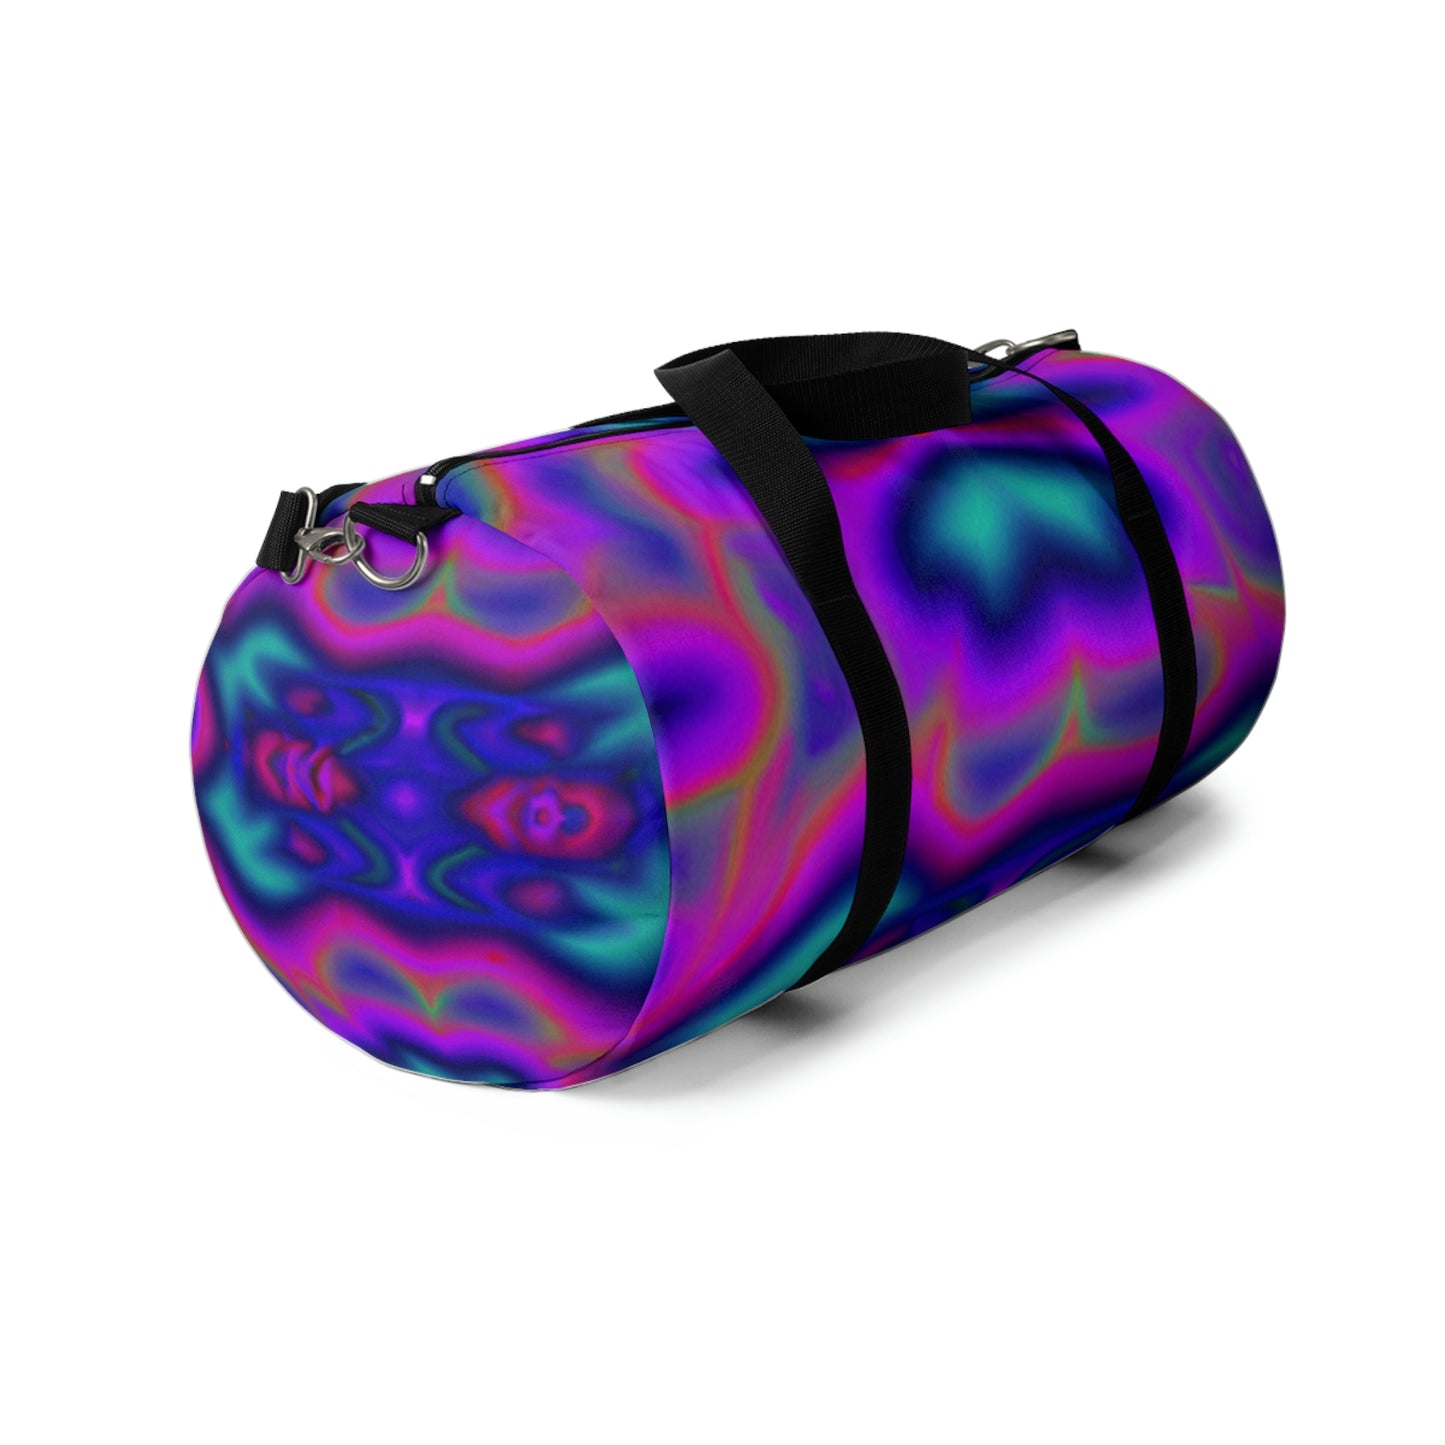 Camilla Couture - Psychedelic Duffel Bag